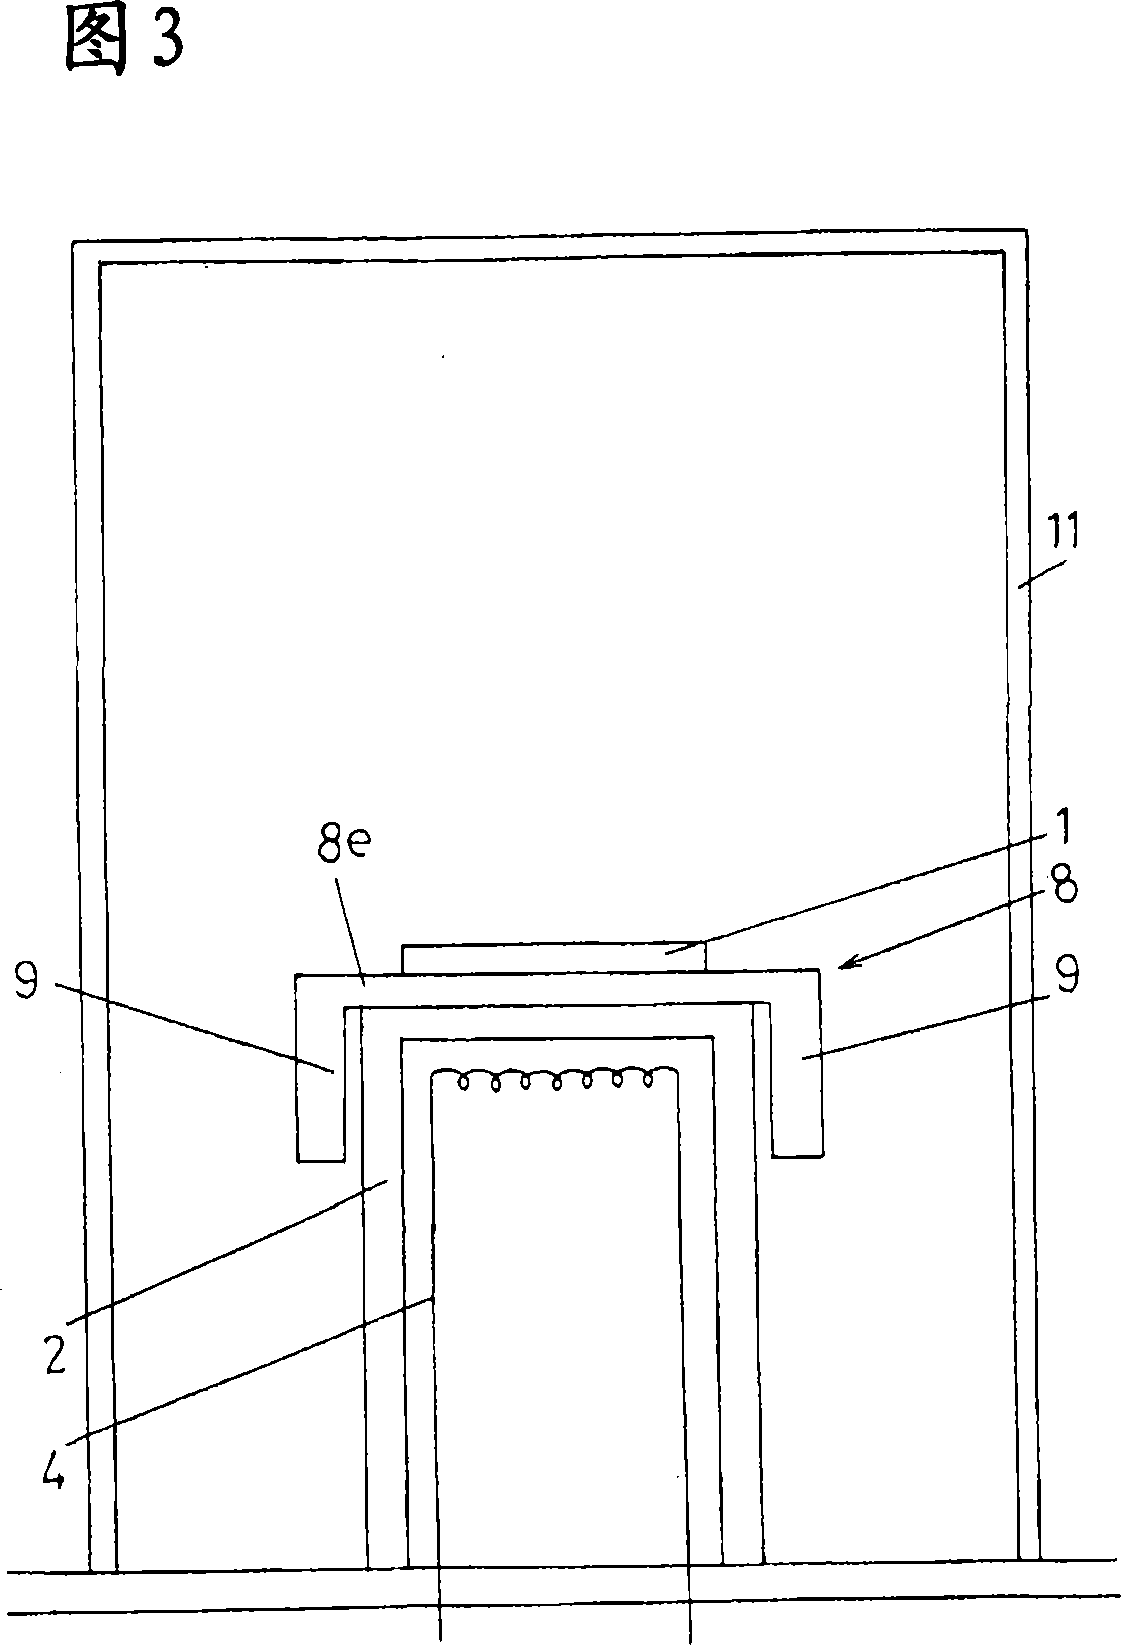 Substrate supporting/transferring tray